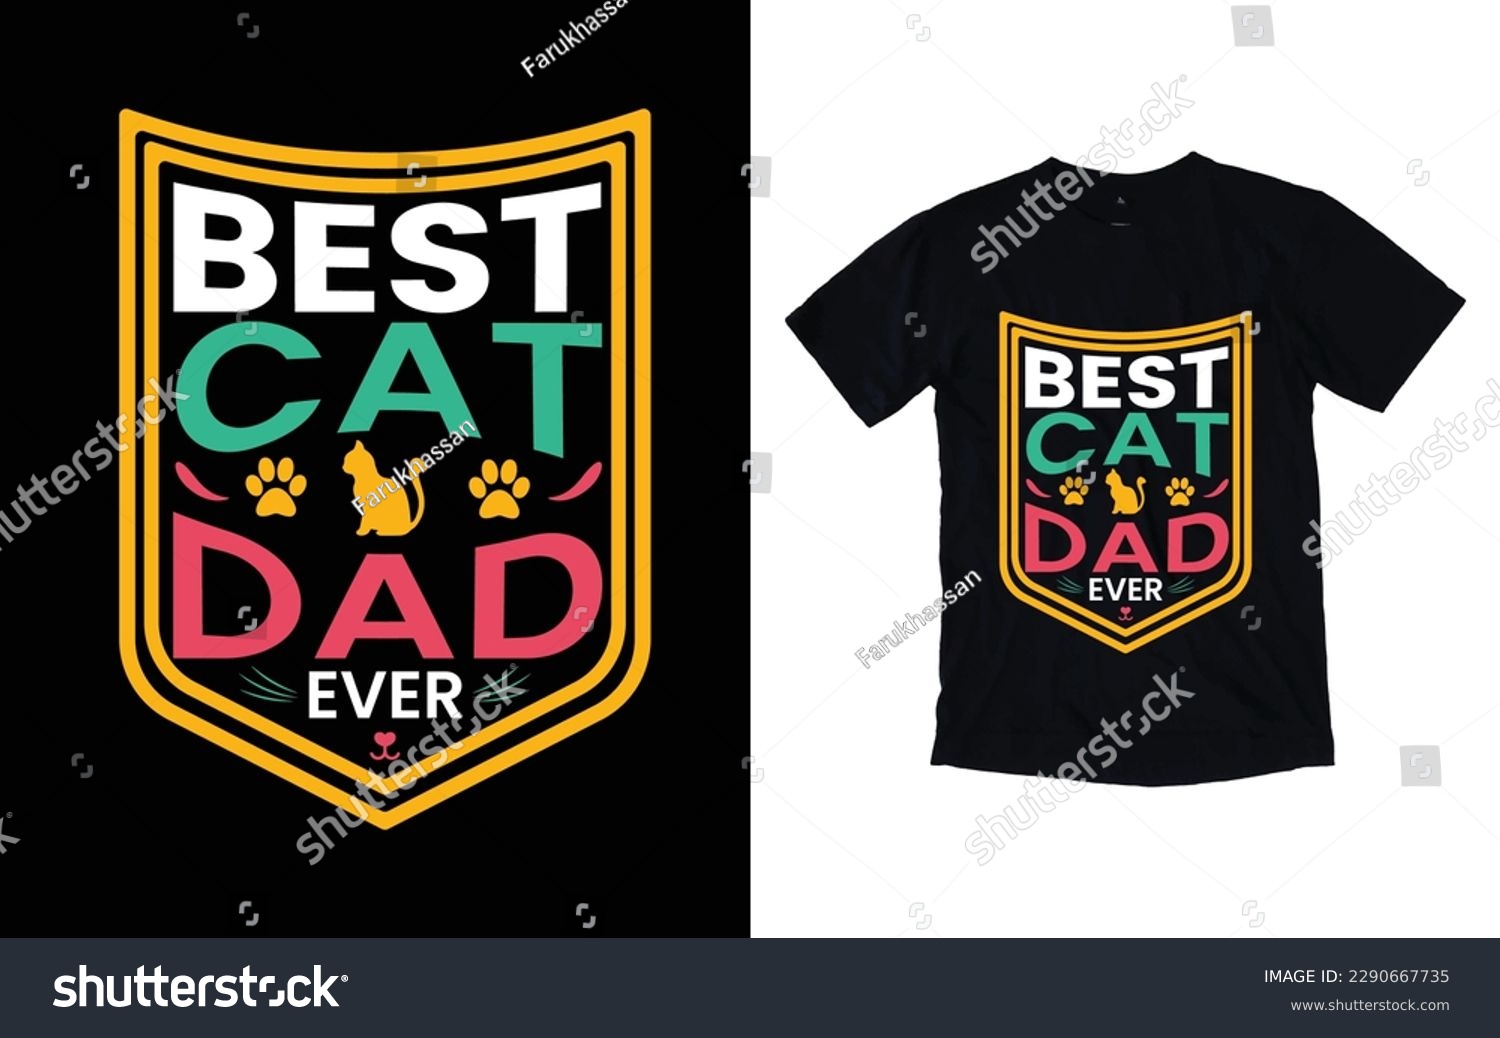 SVG of Best cat dad ever typography t-shirt design, Cat t-shirt design, Pet t-shirt design svg